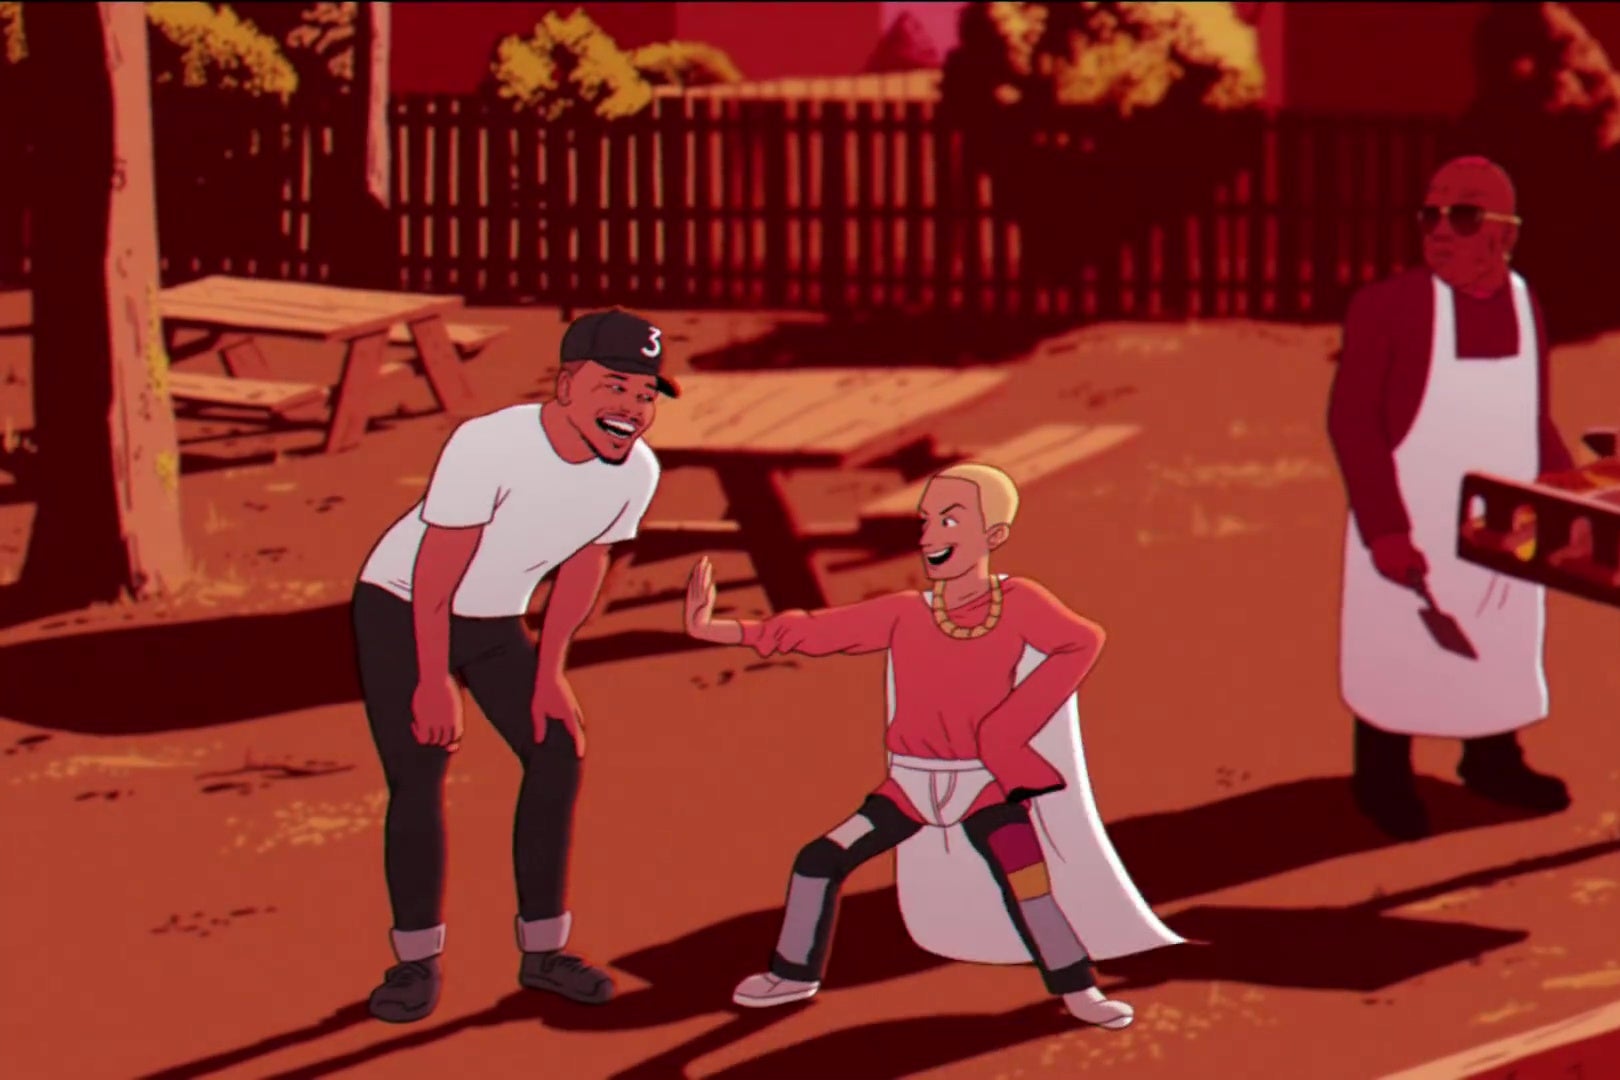 An animated version of Chance the Rapper laughs at an animated version of Jaden Smith, who is wearing a superhero outfit with briefs outside his pants